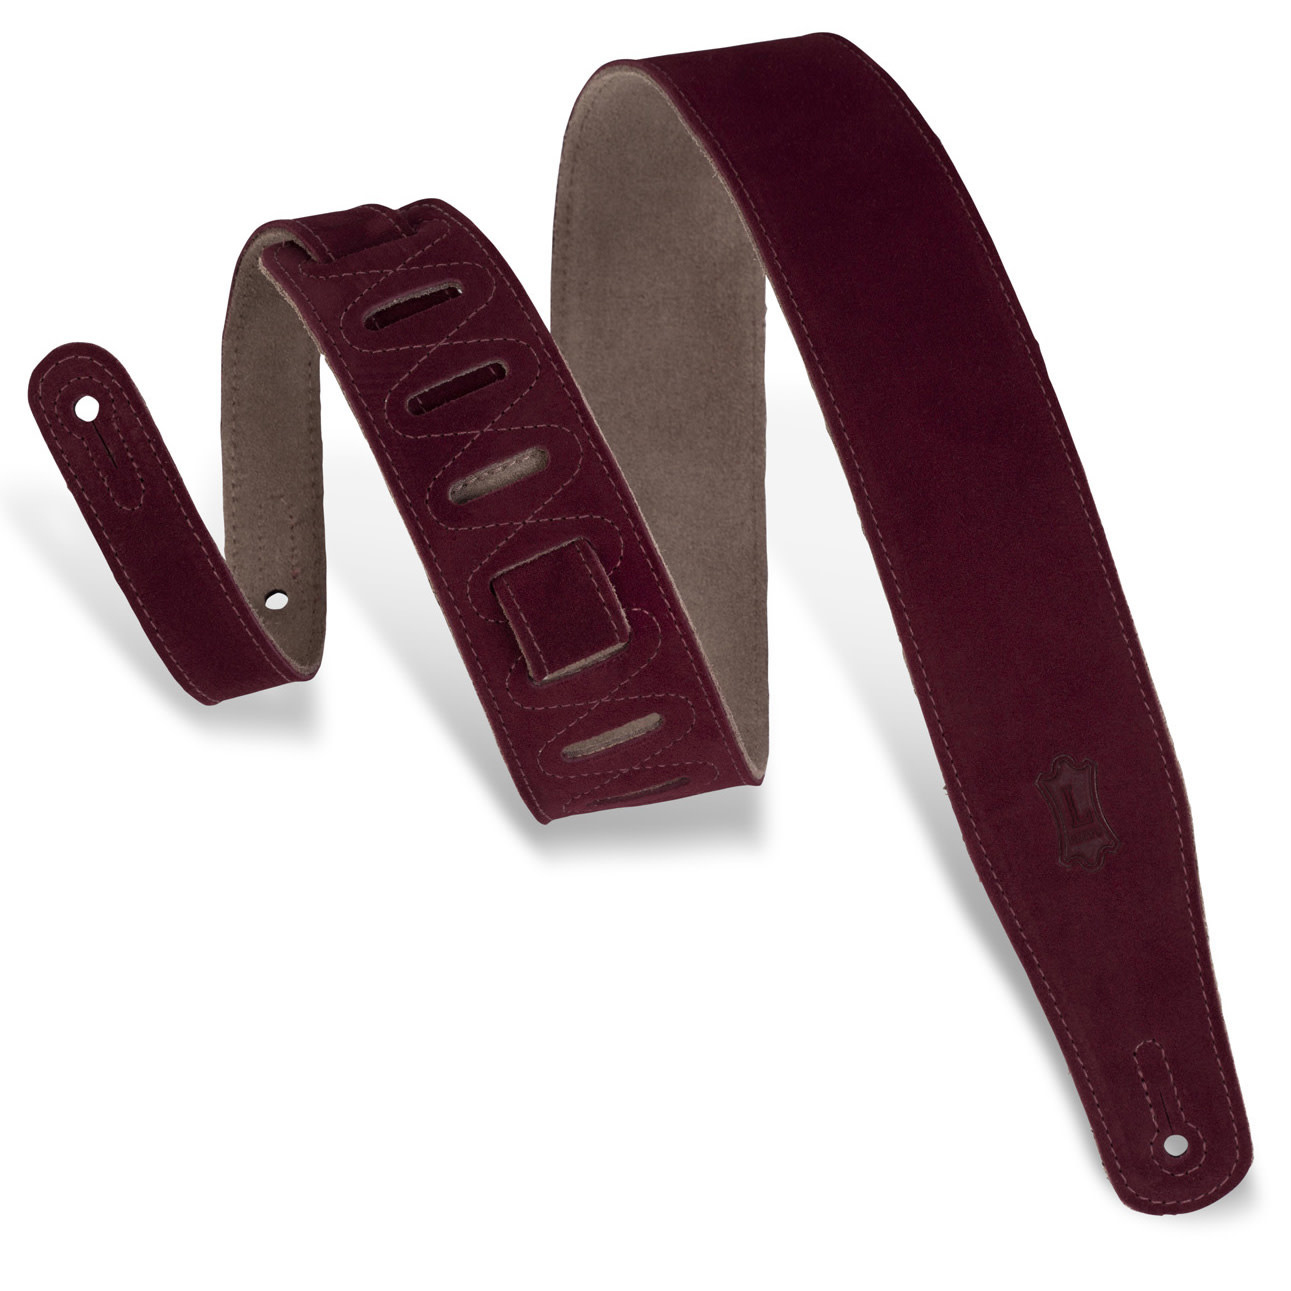 Levy's Levy's Classic Series Guitar Strap - Burgundy